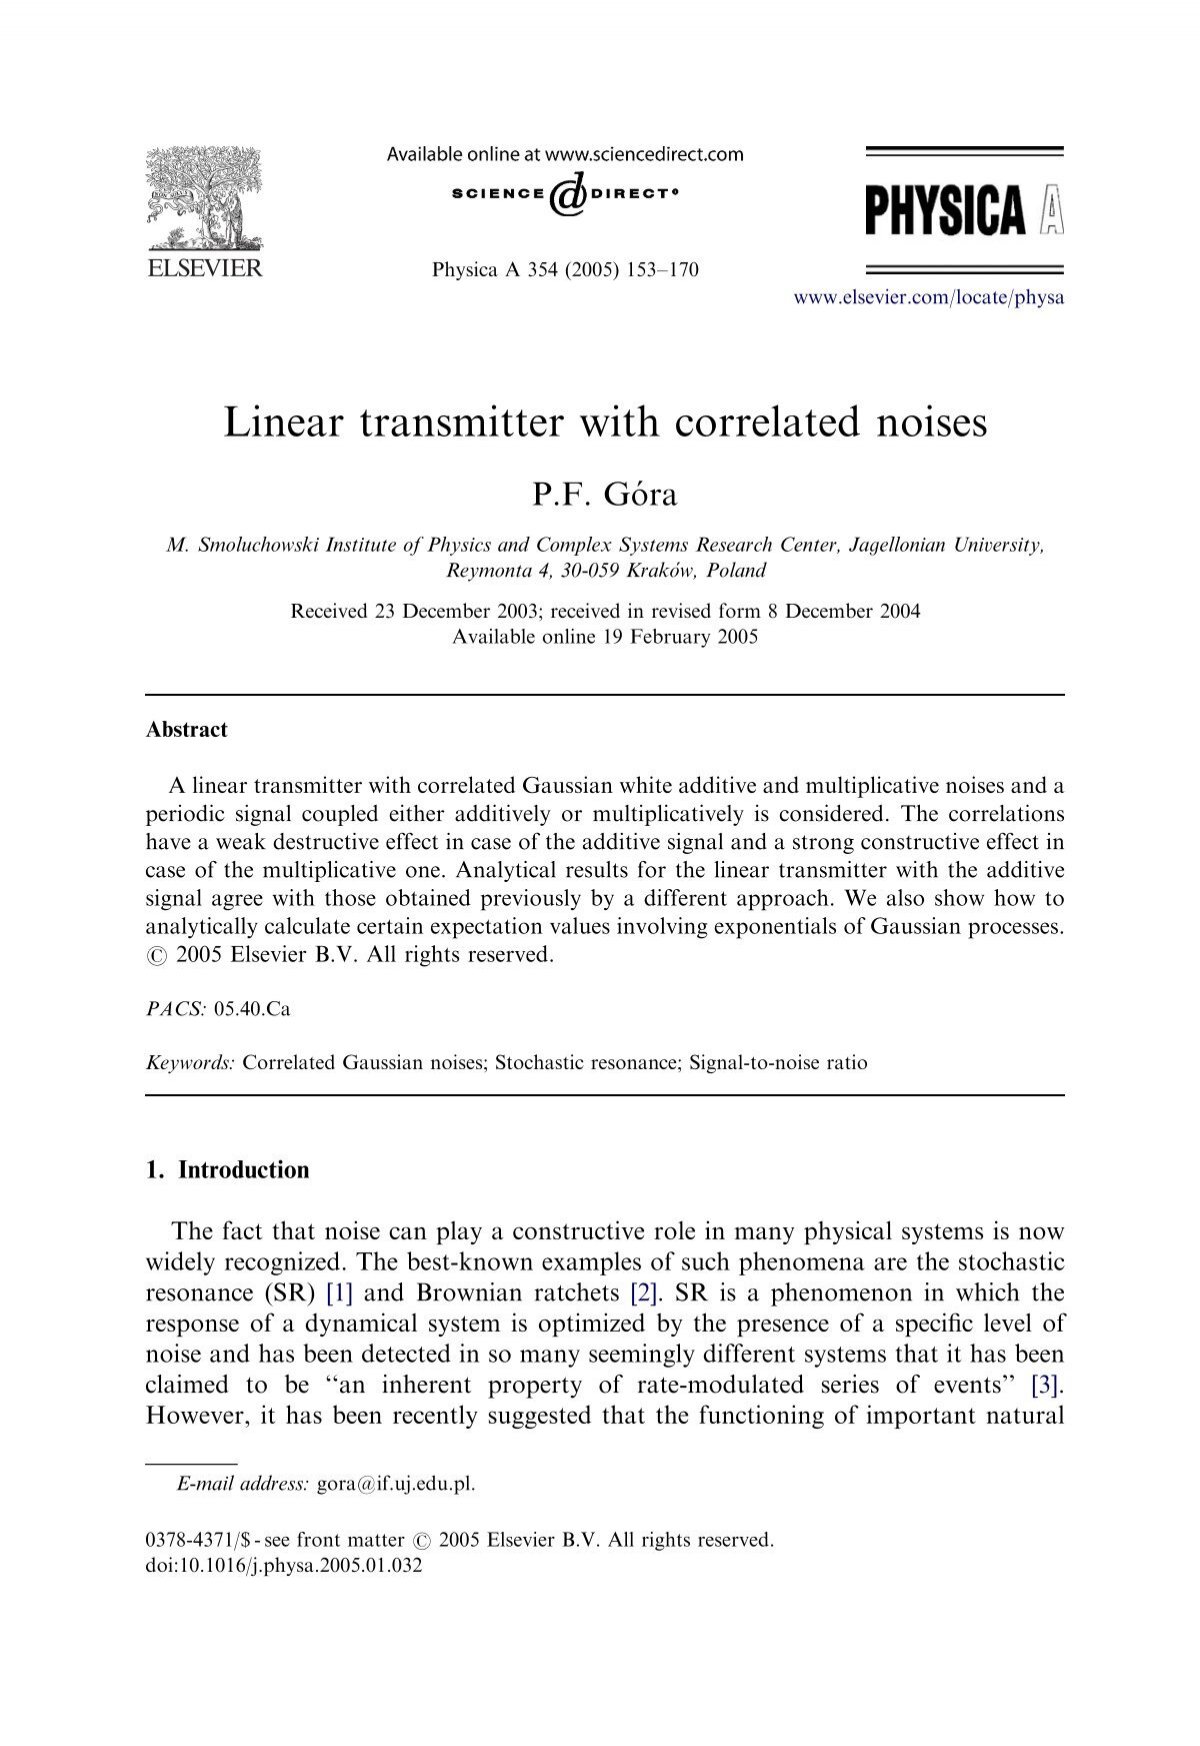 Linear Transmitter With Correlated Noises